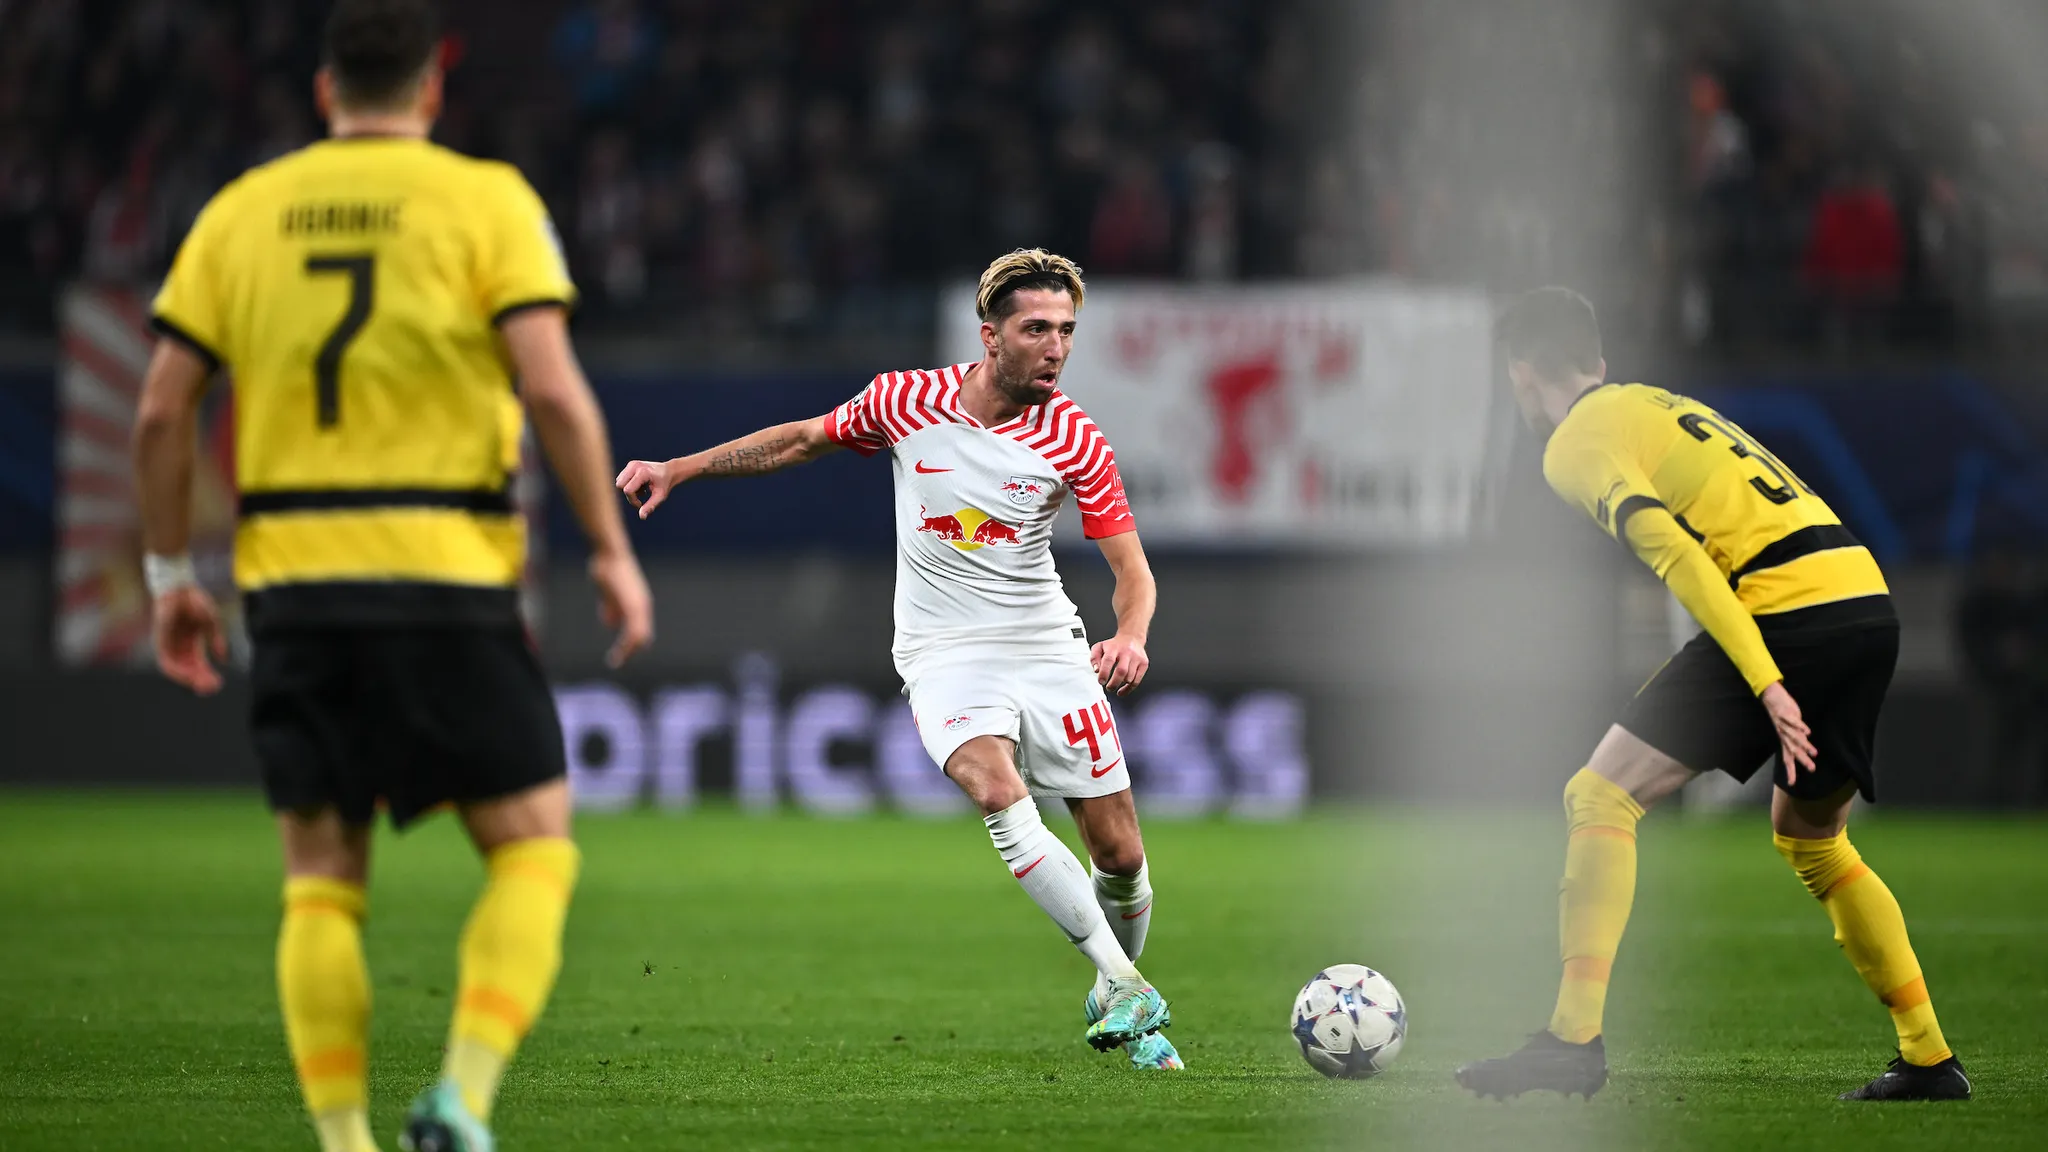 Kevin Kampl impressed during our final group stage game